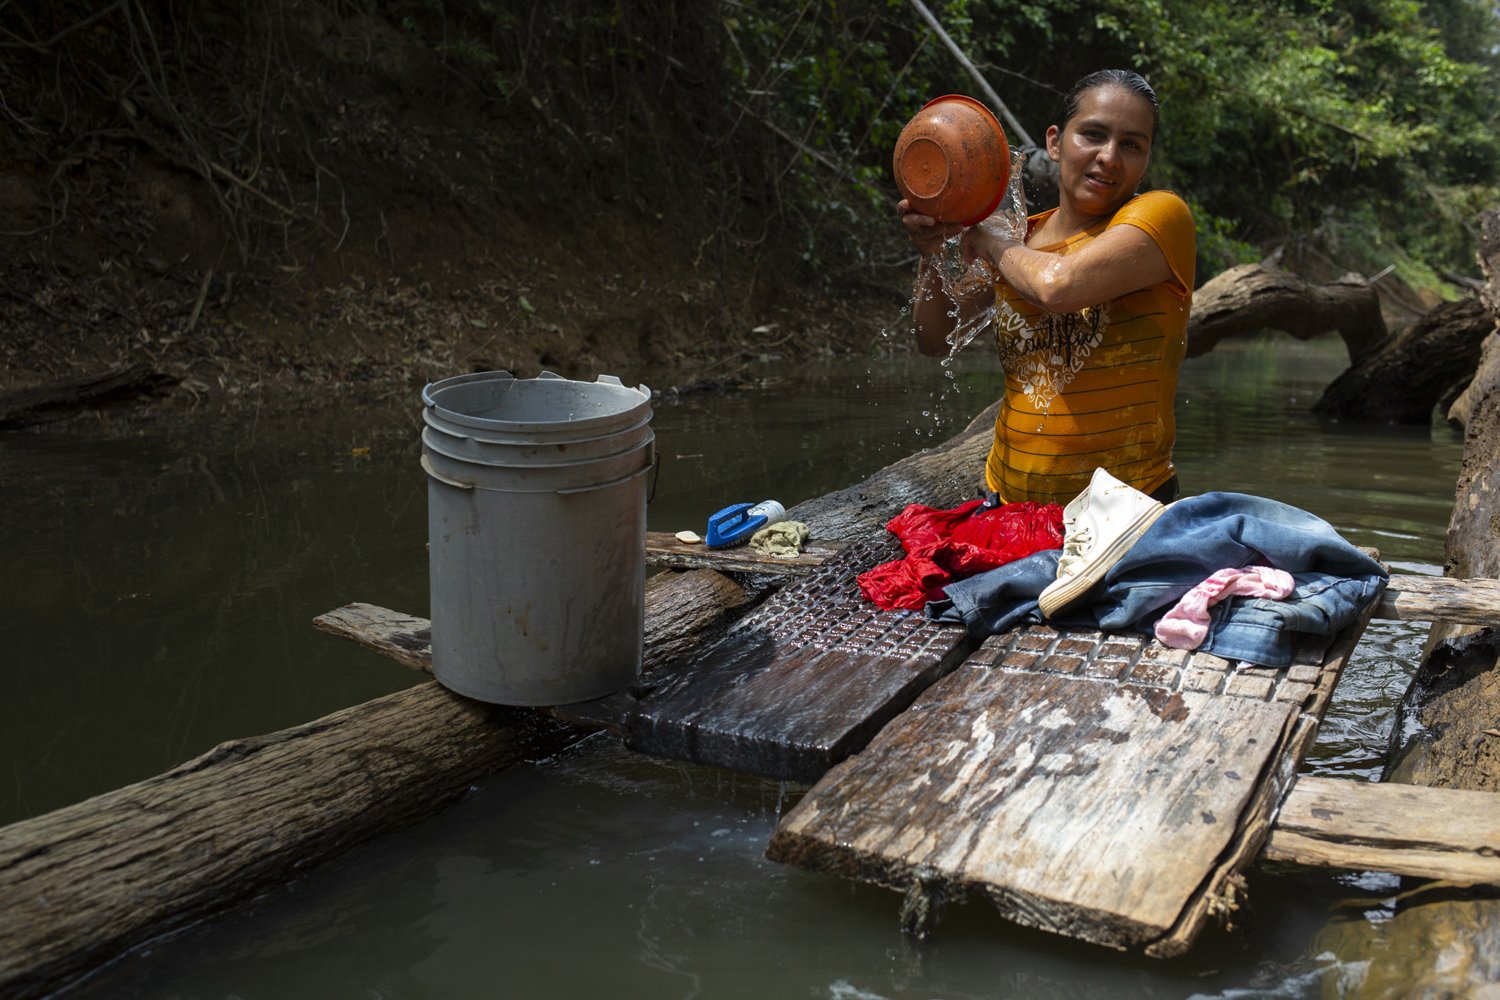  Dora, washes her family’s clothes and bathes in the gully behind her house in Colombia’s rural Guayabero region. Dora has received training in journalism from a local media collective, but says it’s been impossible to find the time to report–or even